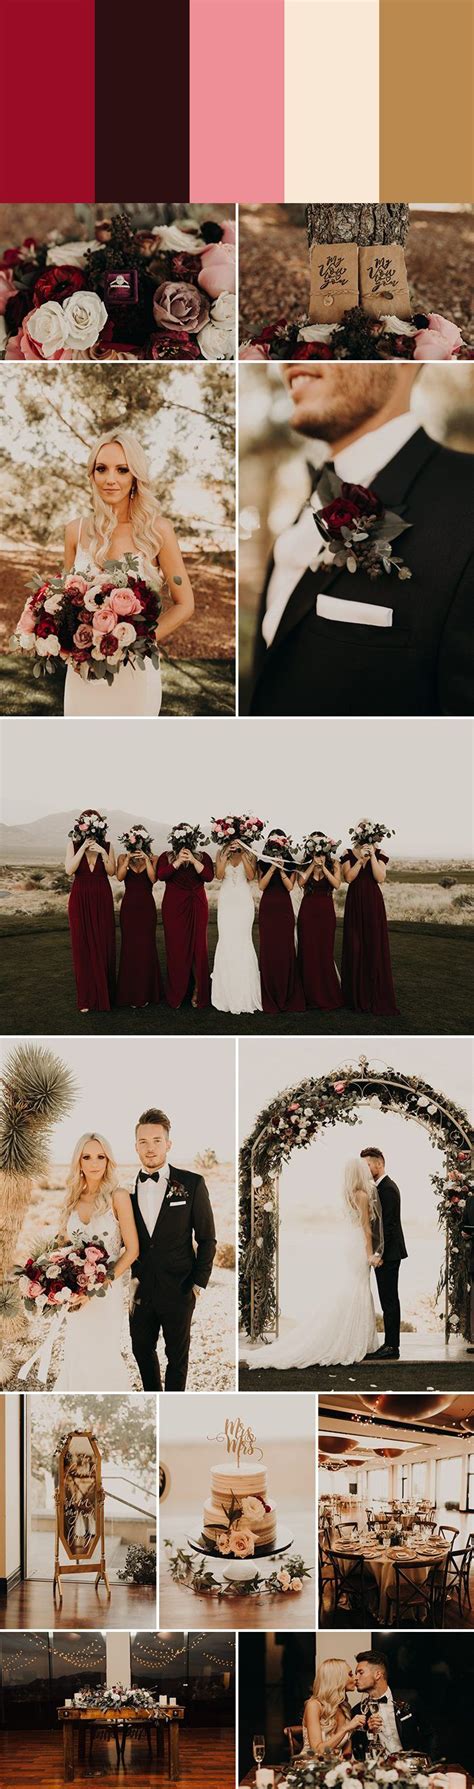 The Burgundy Red And Pink Tones In These Romantic Wedding Color